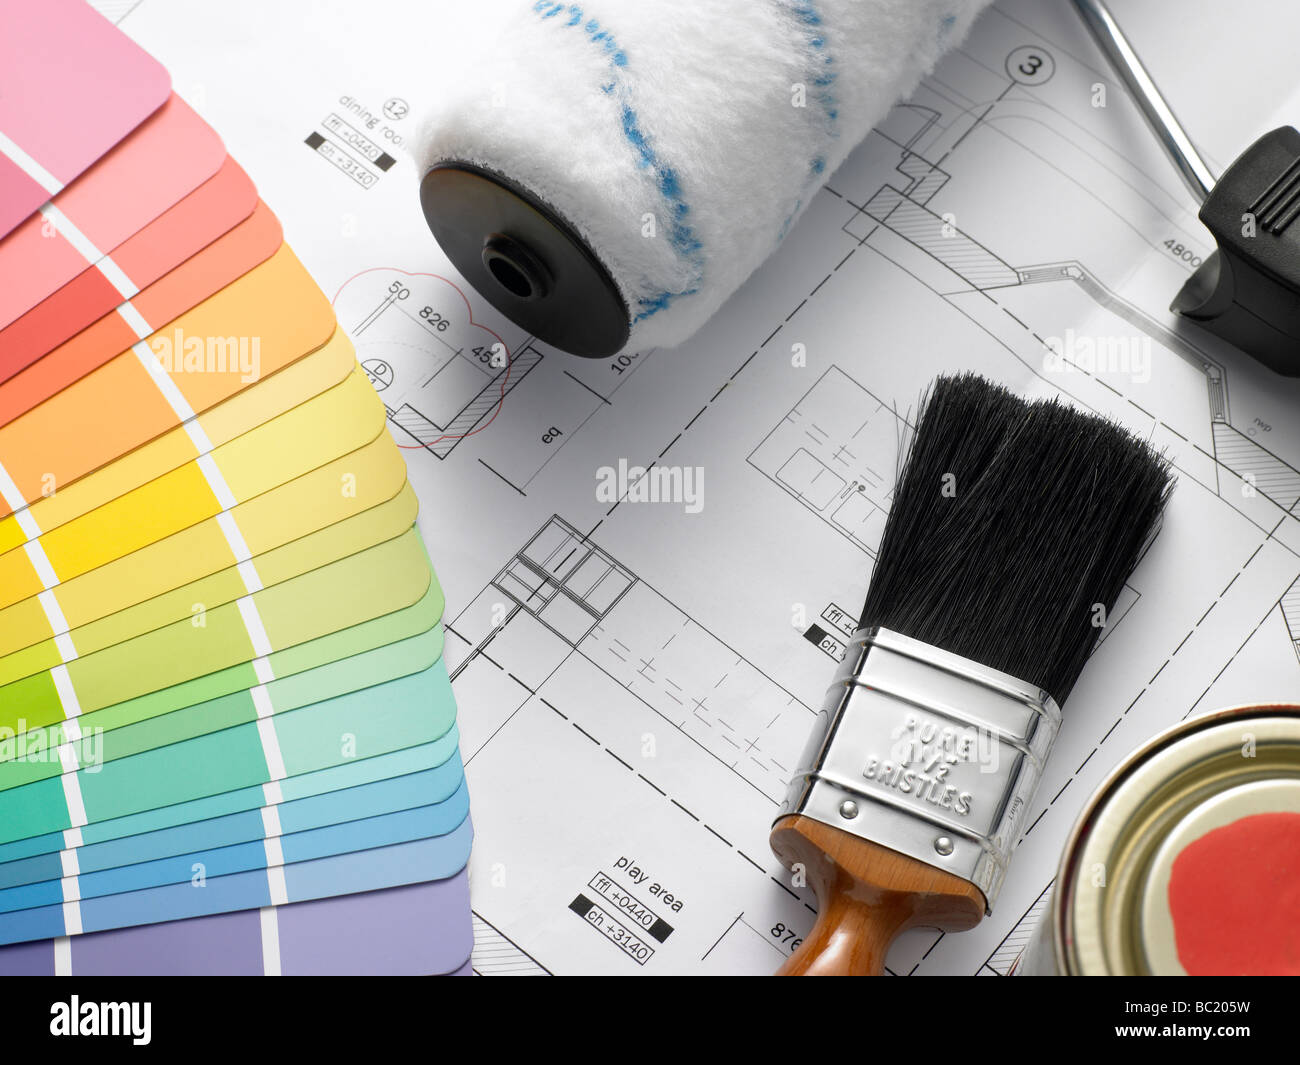 Decorating Equipment On House Plans Stock Photo